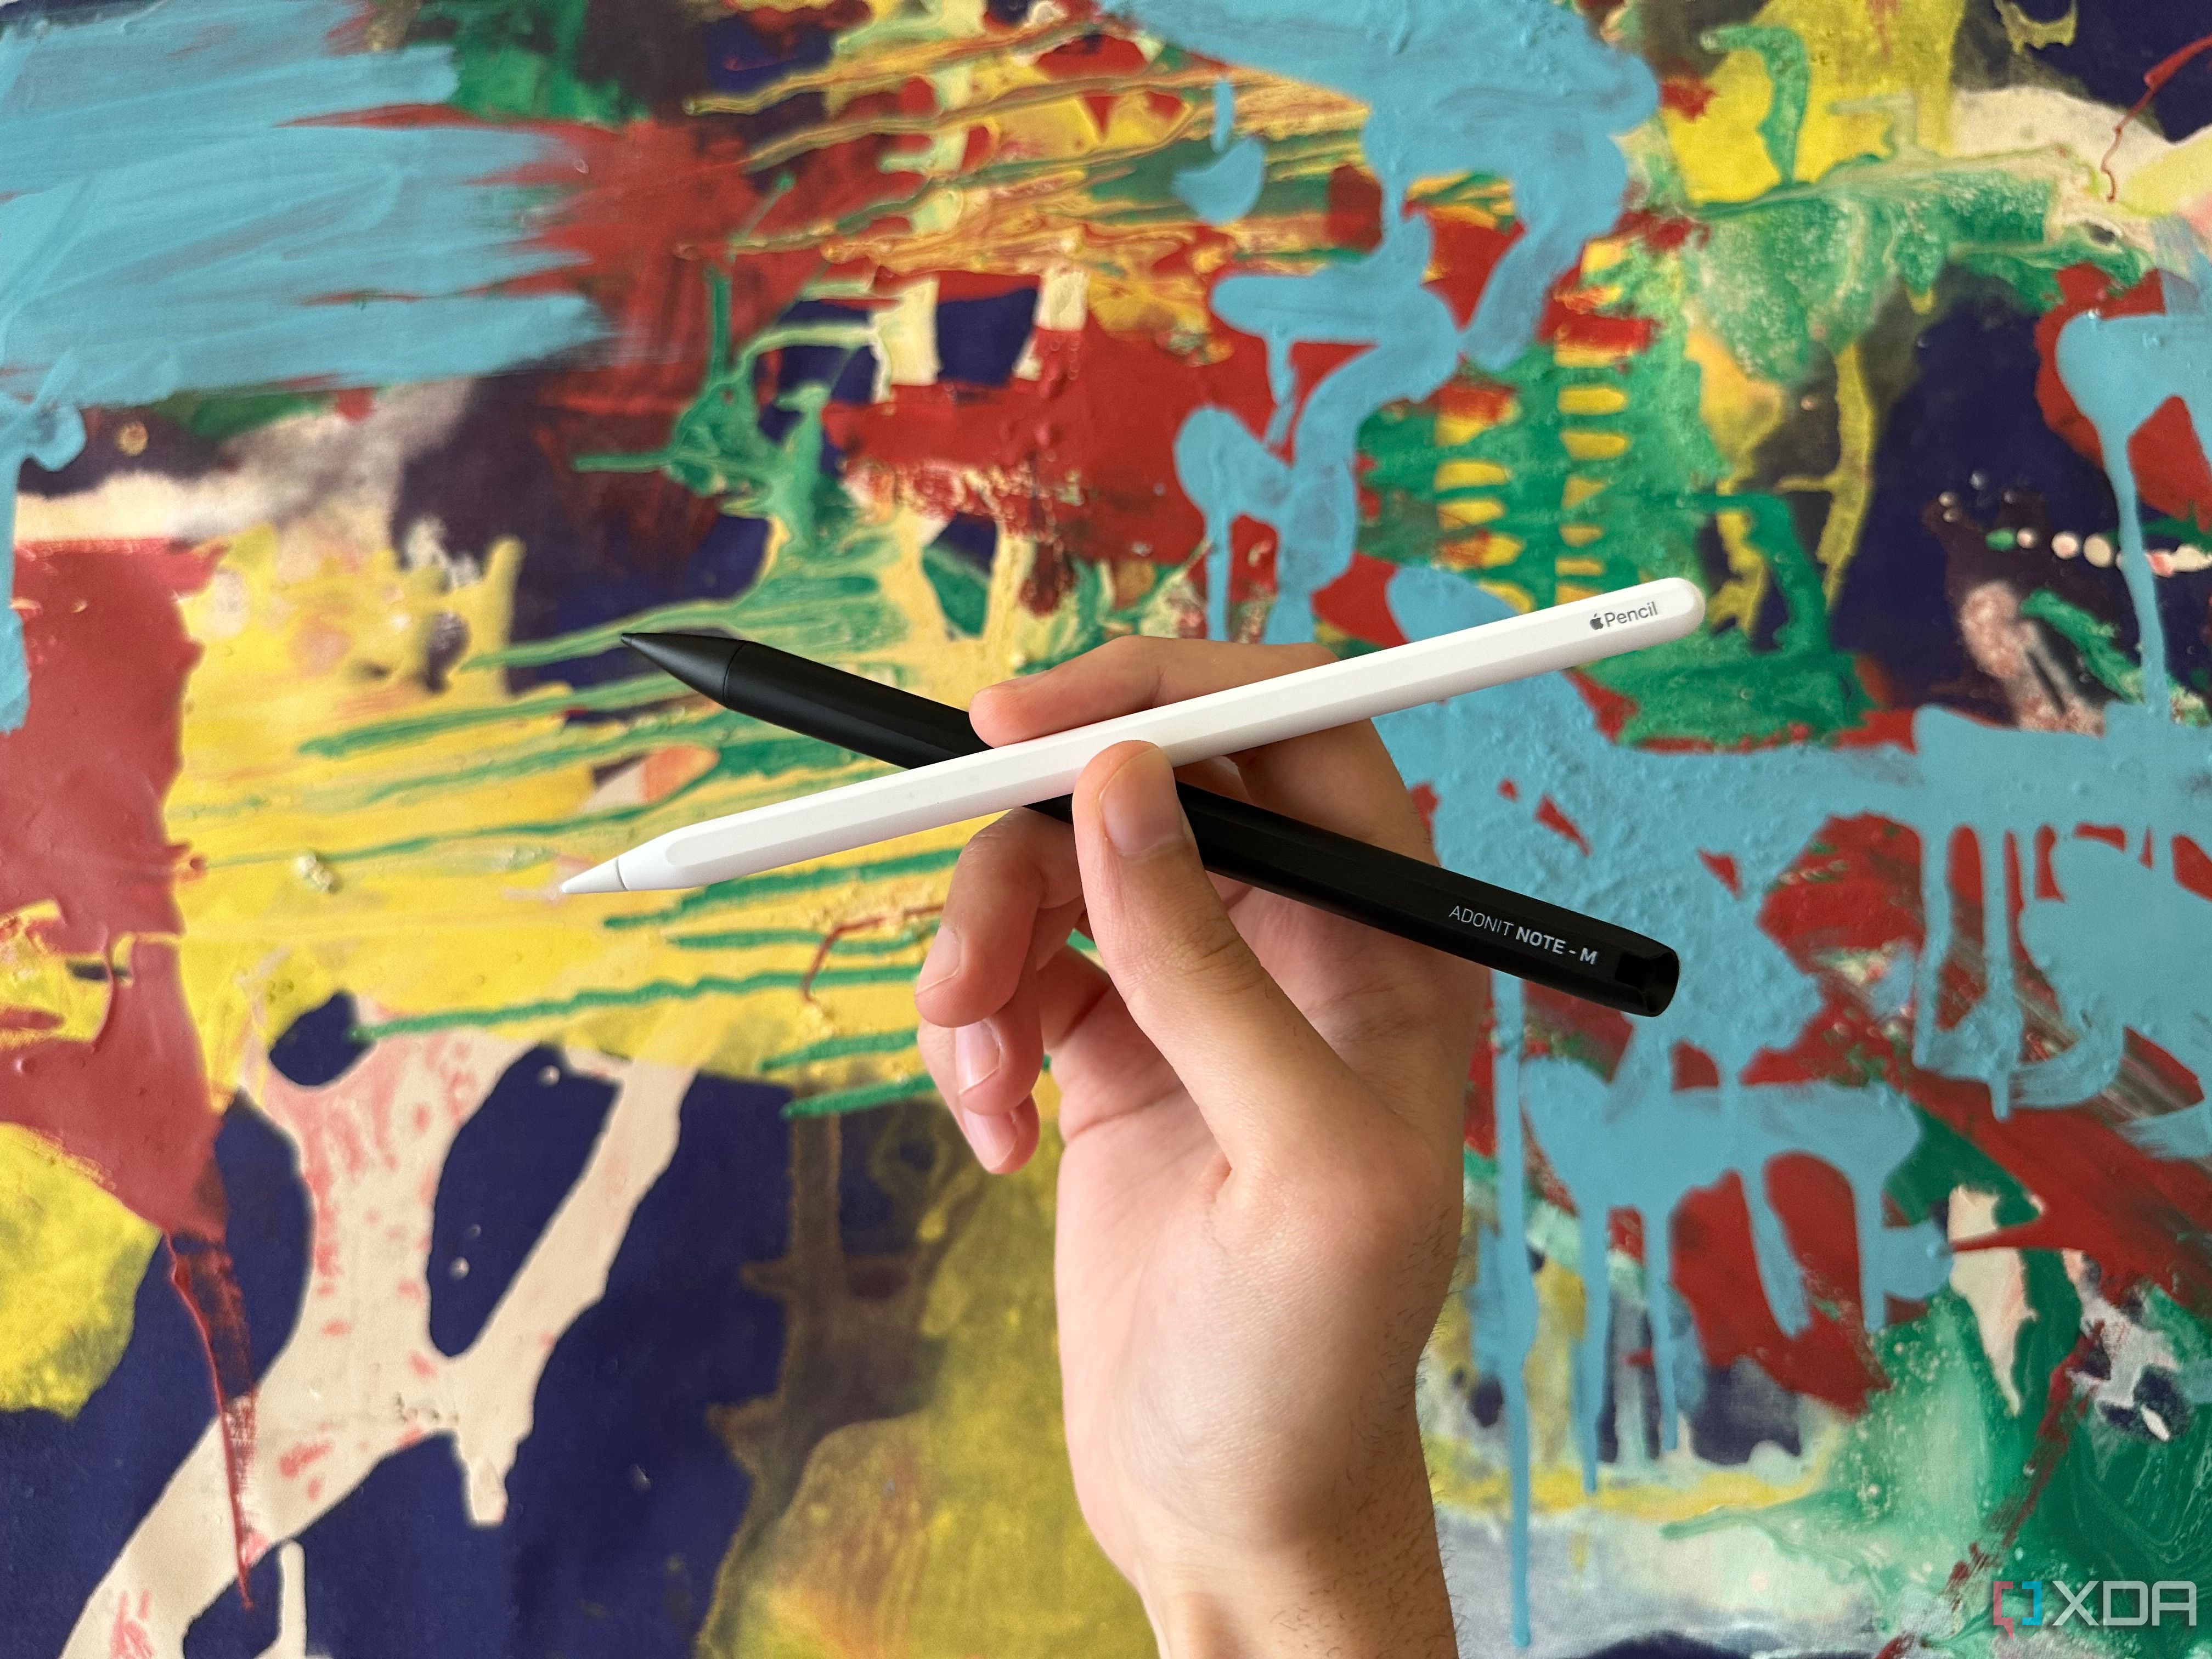 Adonit Note-M and Apple Pencil 2 side by side